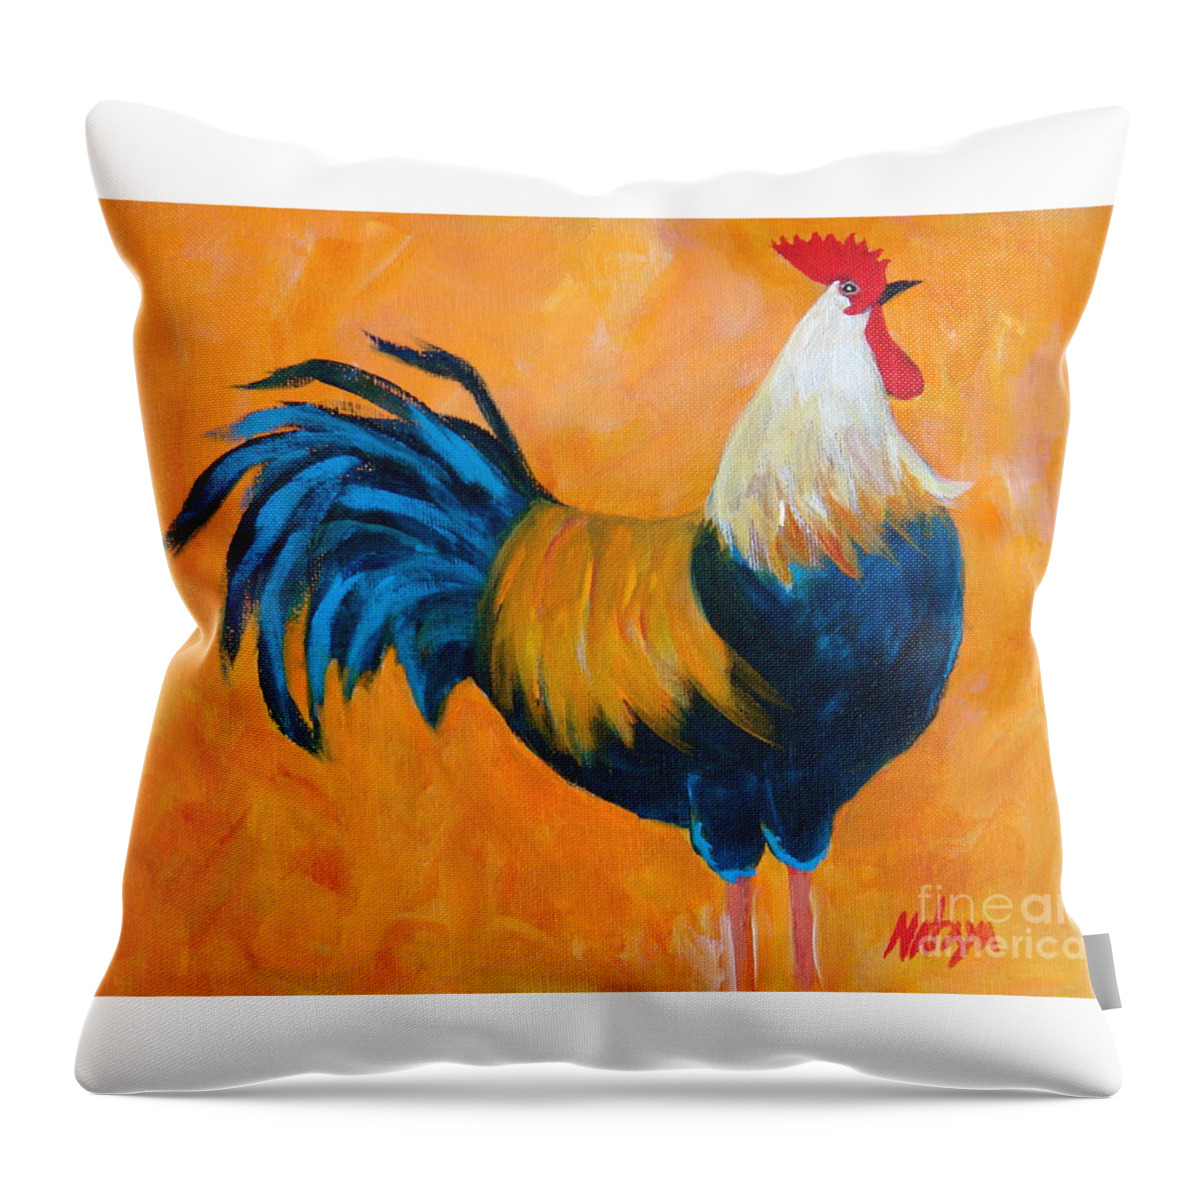 Rooster Throw Pillow featuring the painting Maraichi by Nataya Crow